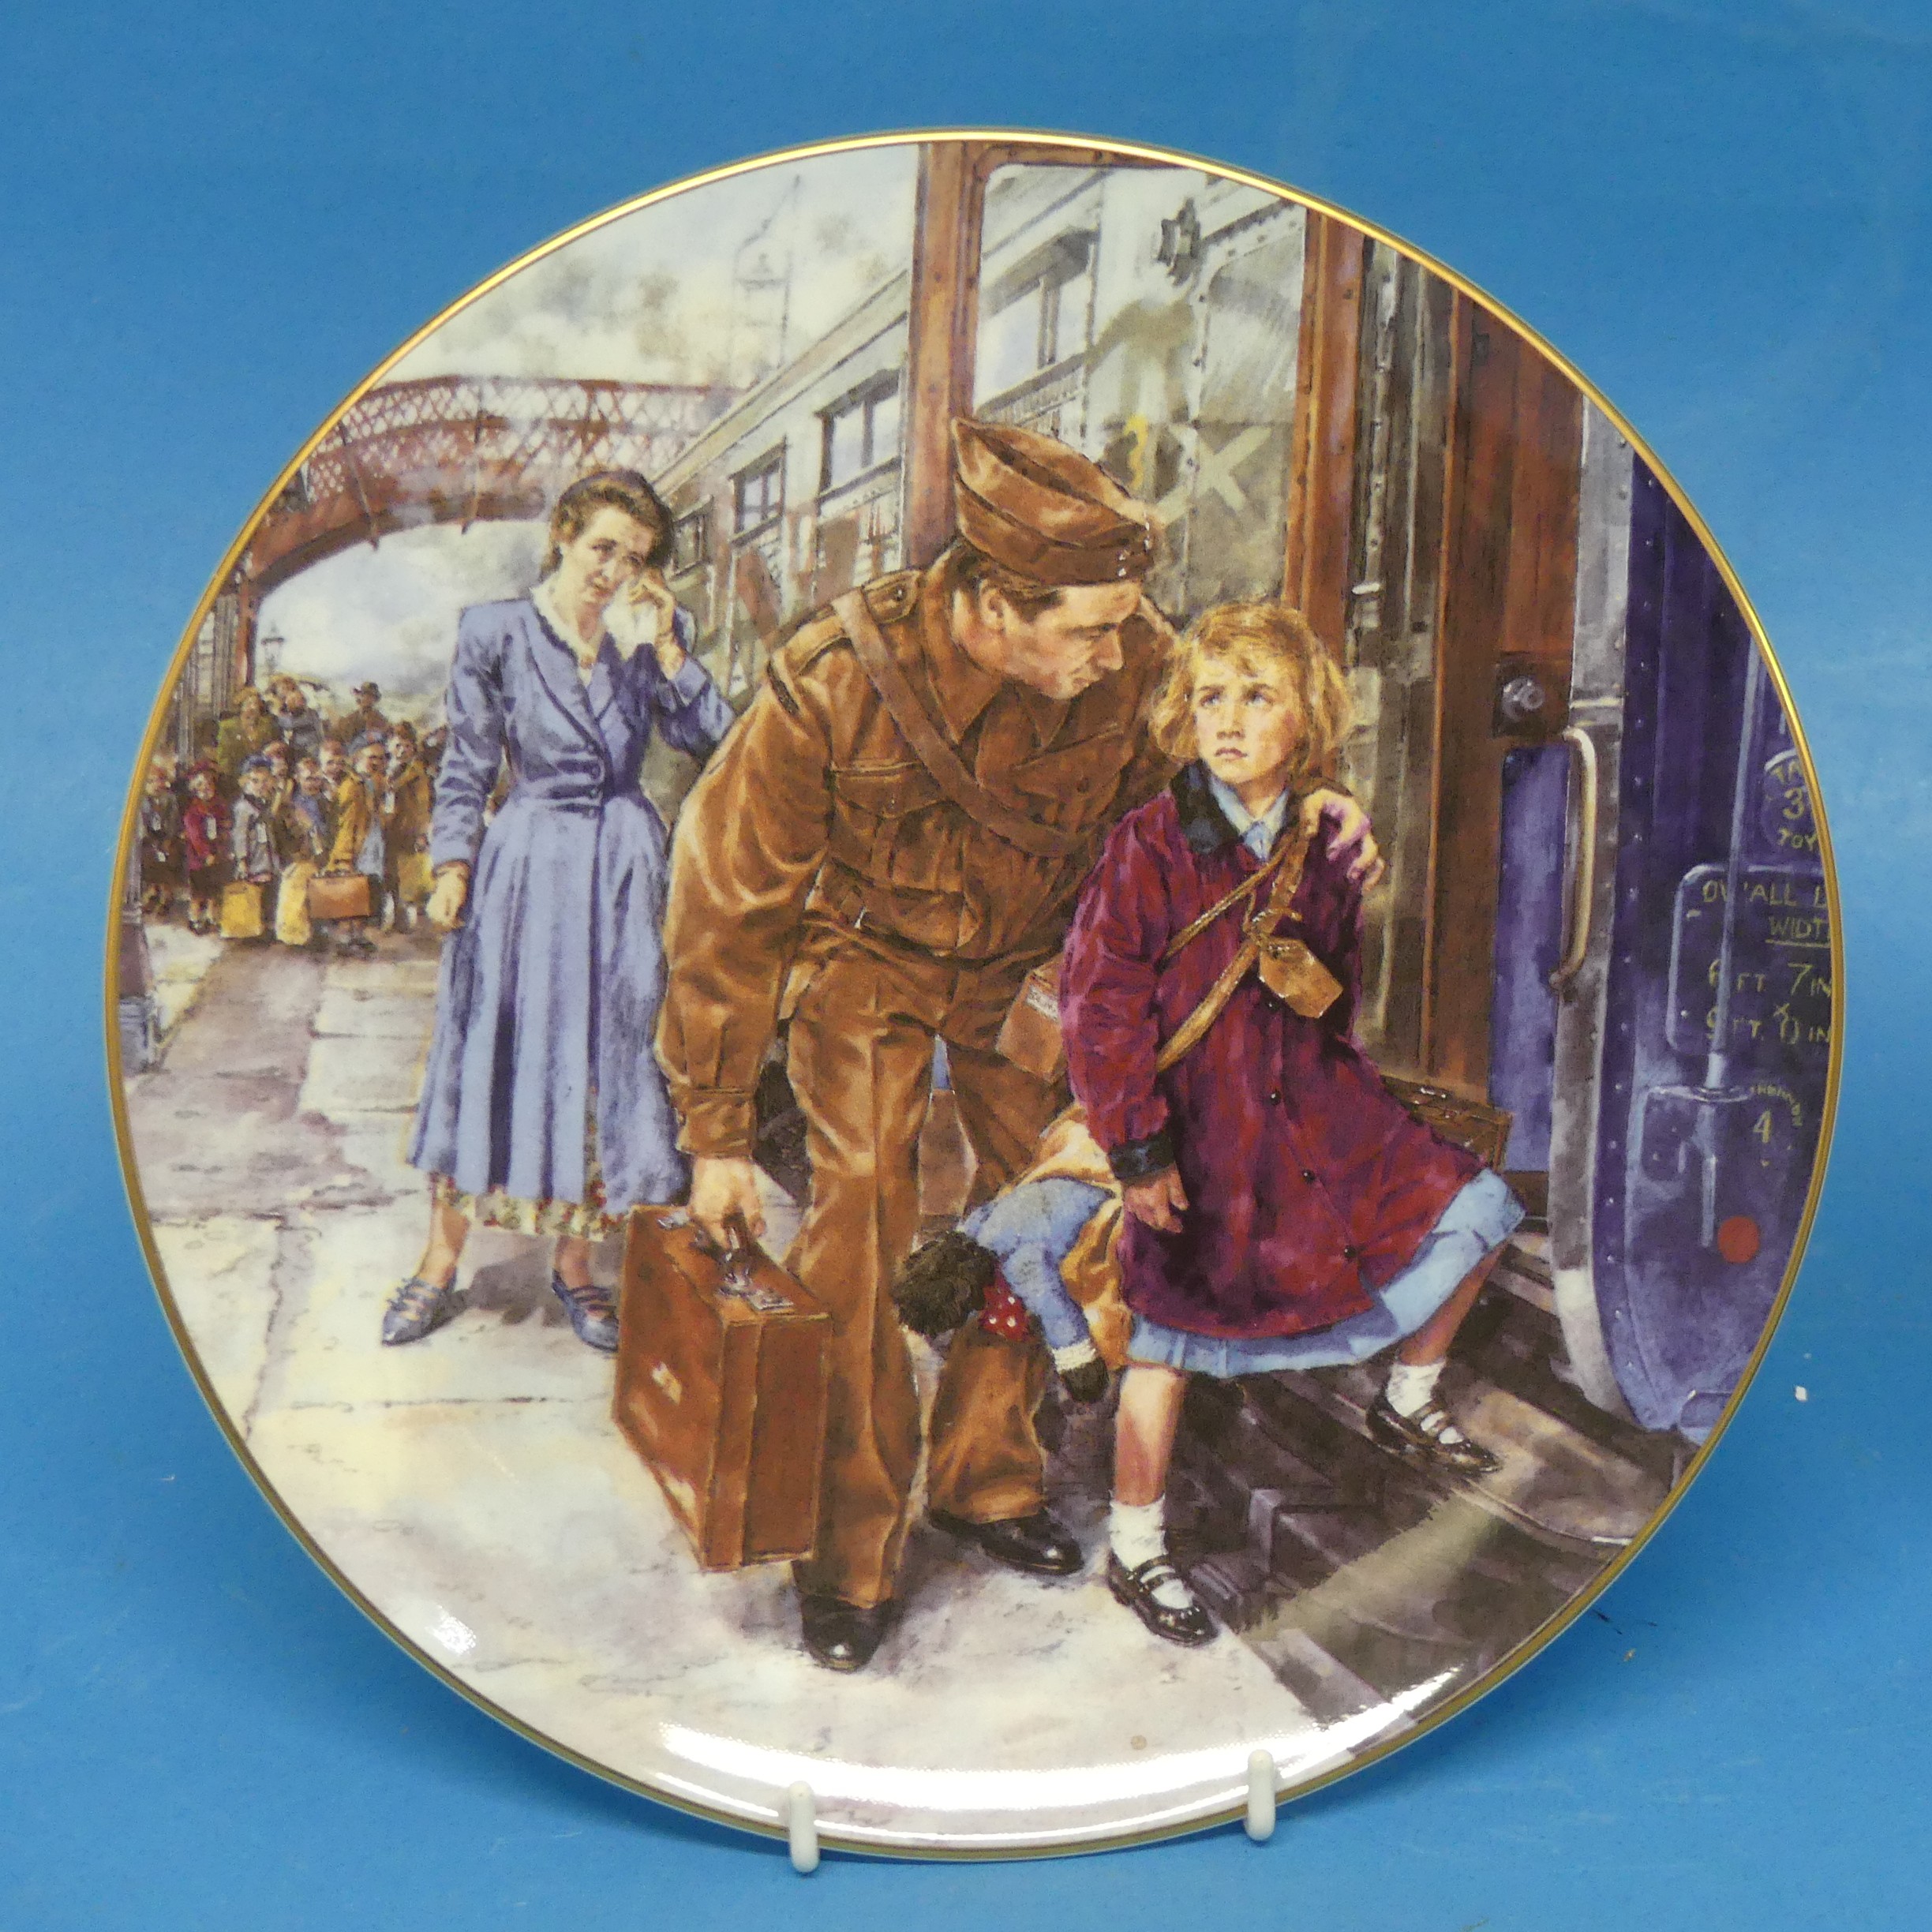 A Royal Doulton 'The Girl Evacuee' seriesware Plate, together with 'The Boy Evacuee' Plate, both - Image 2 of 4